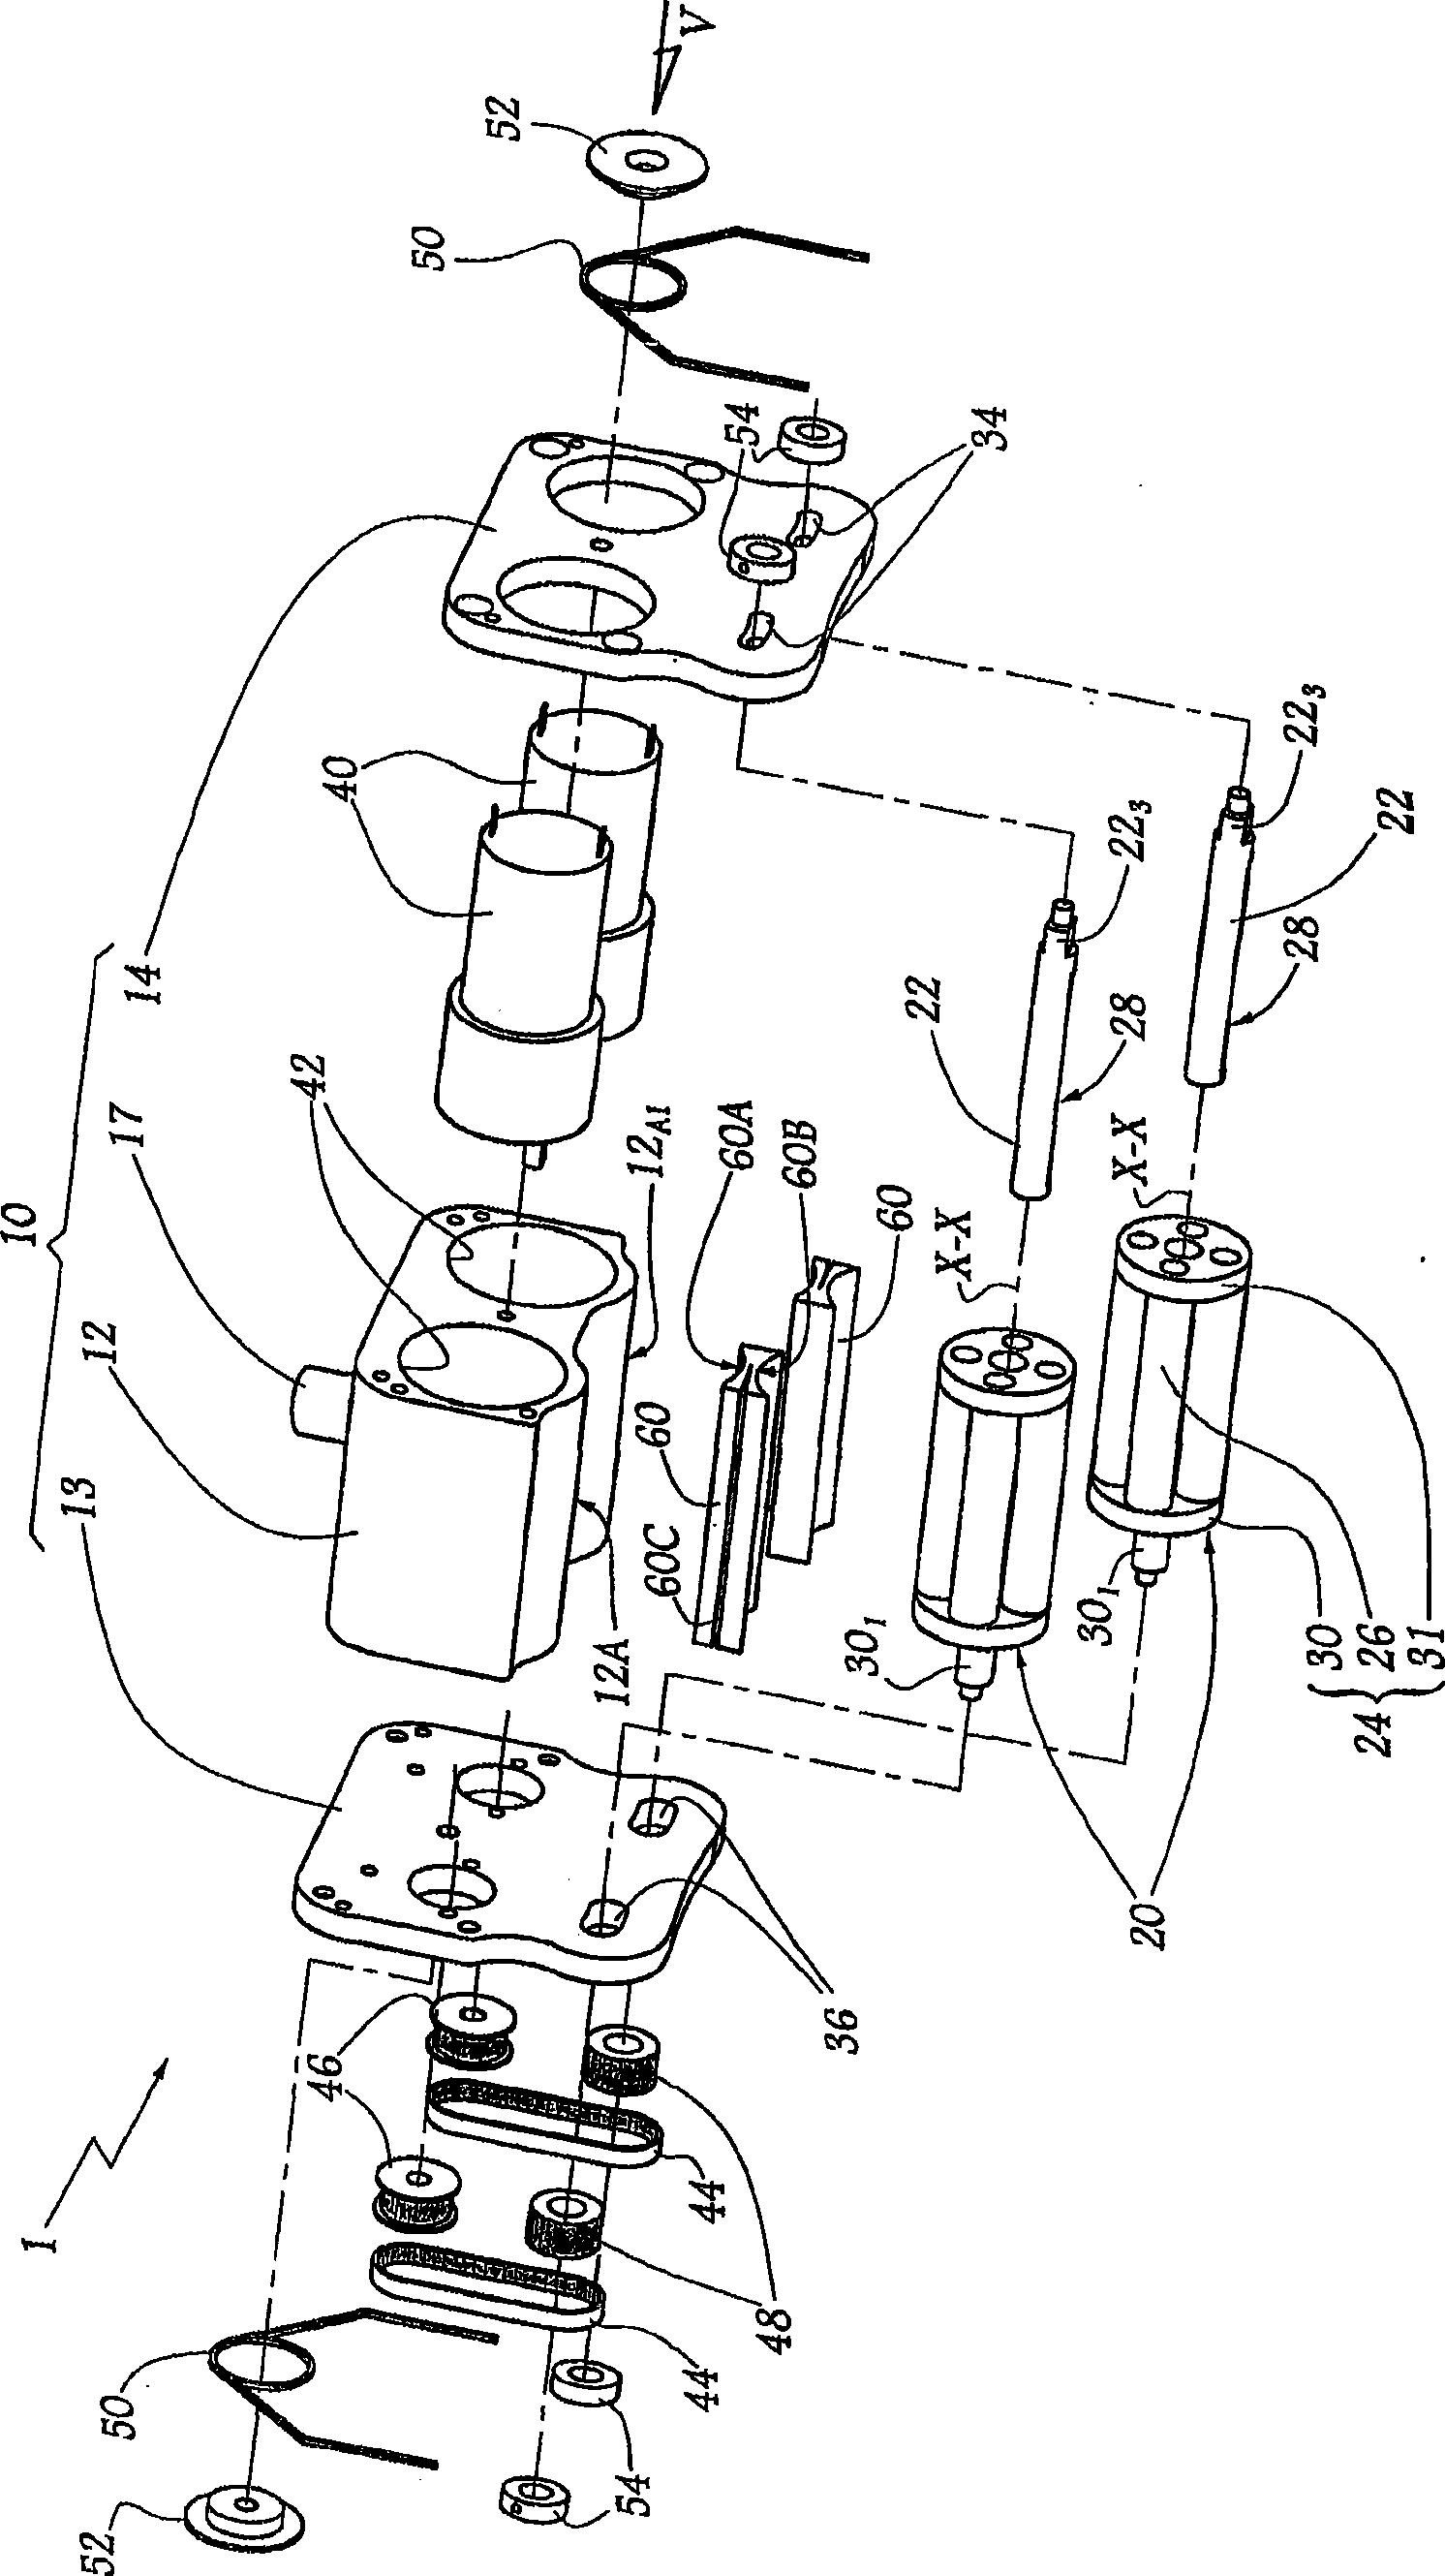 Device for treating, in particular massaging, the connective tissue of the skin